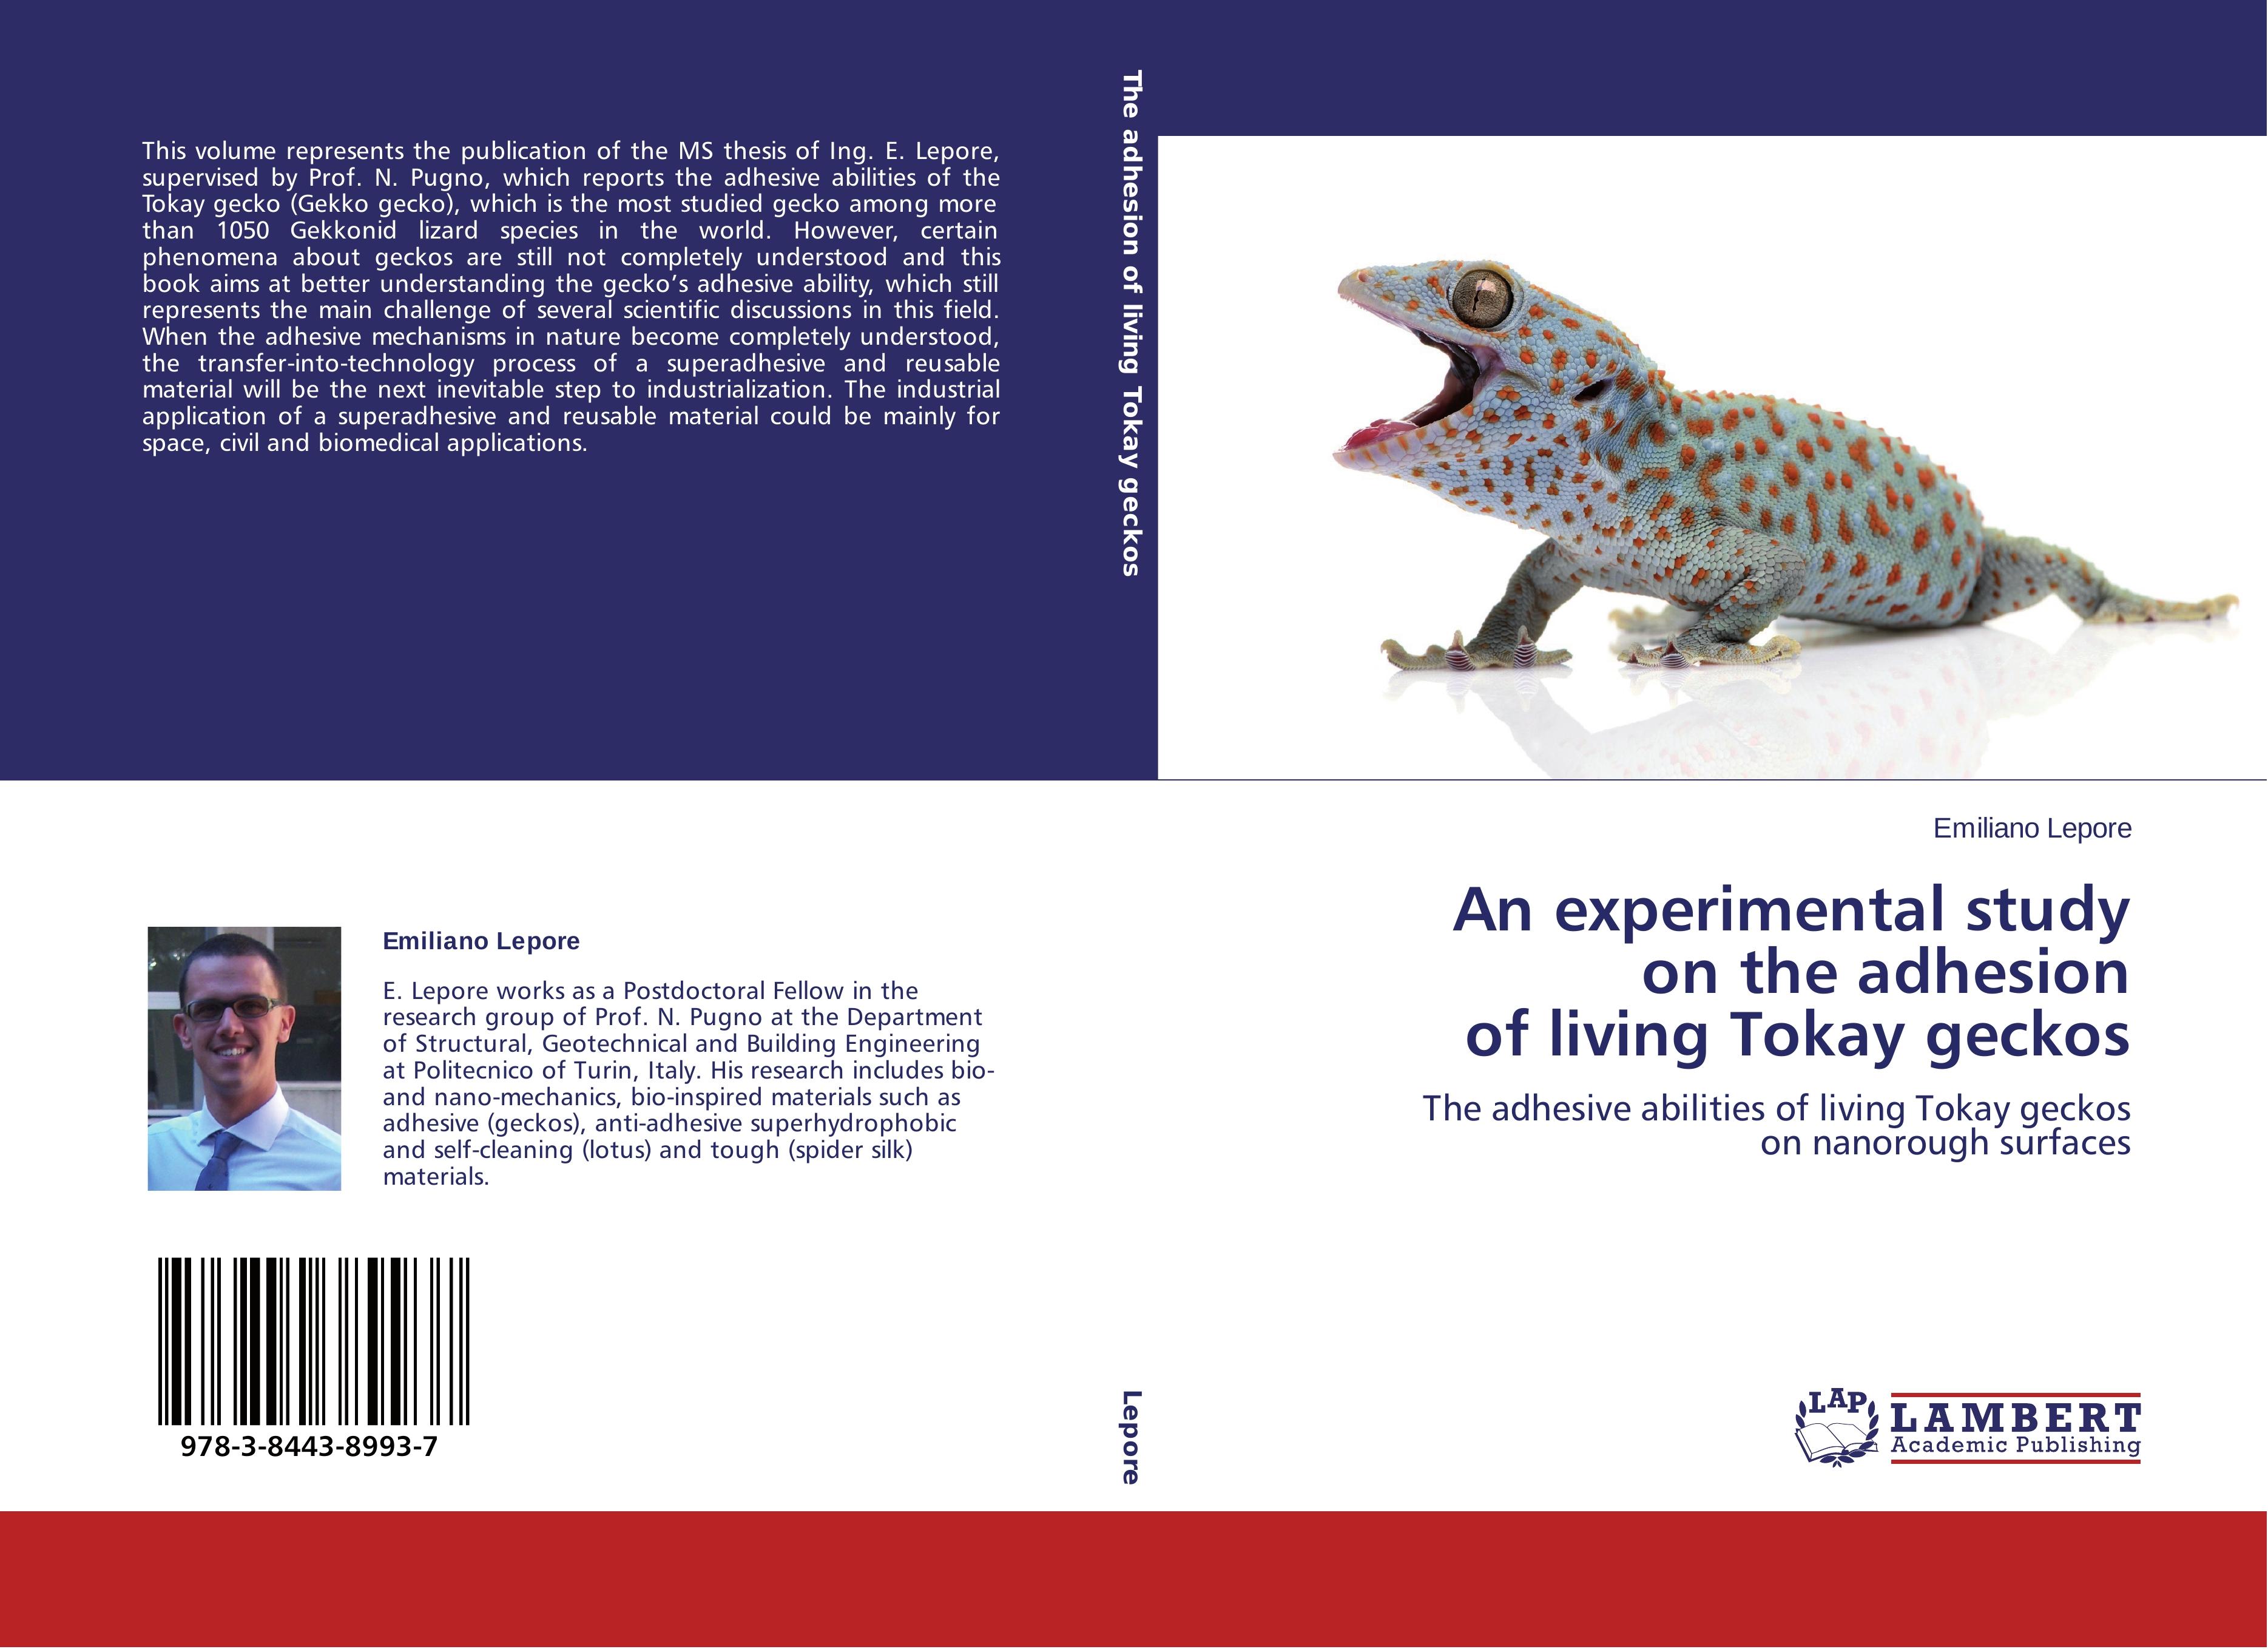 An experimental study on the adhesion of living Tokay geckos - Emiliano Lepore